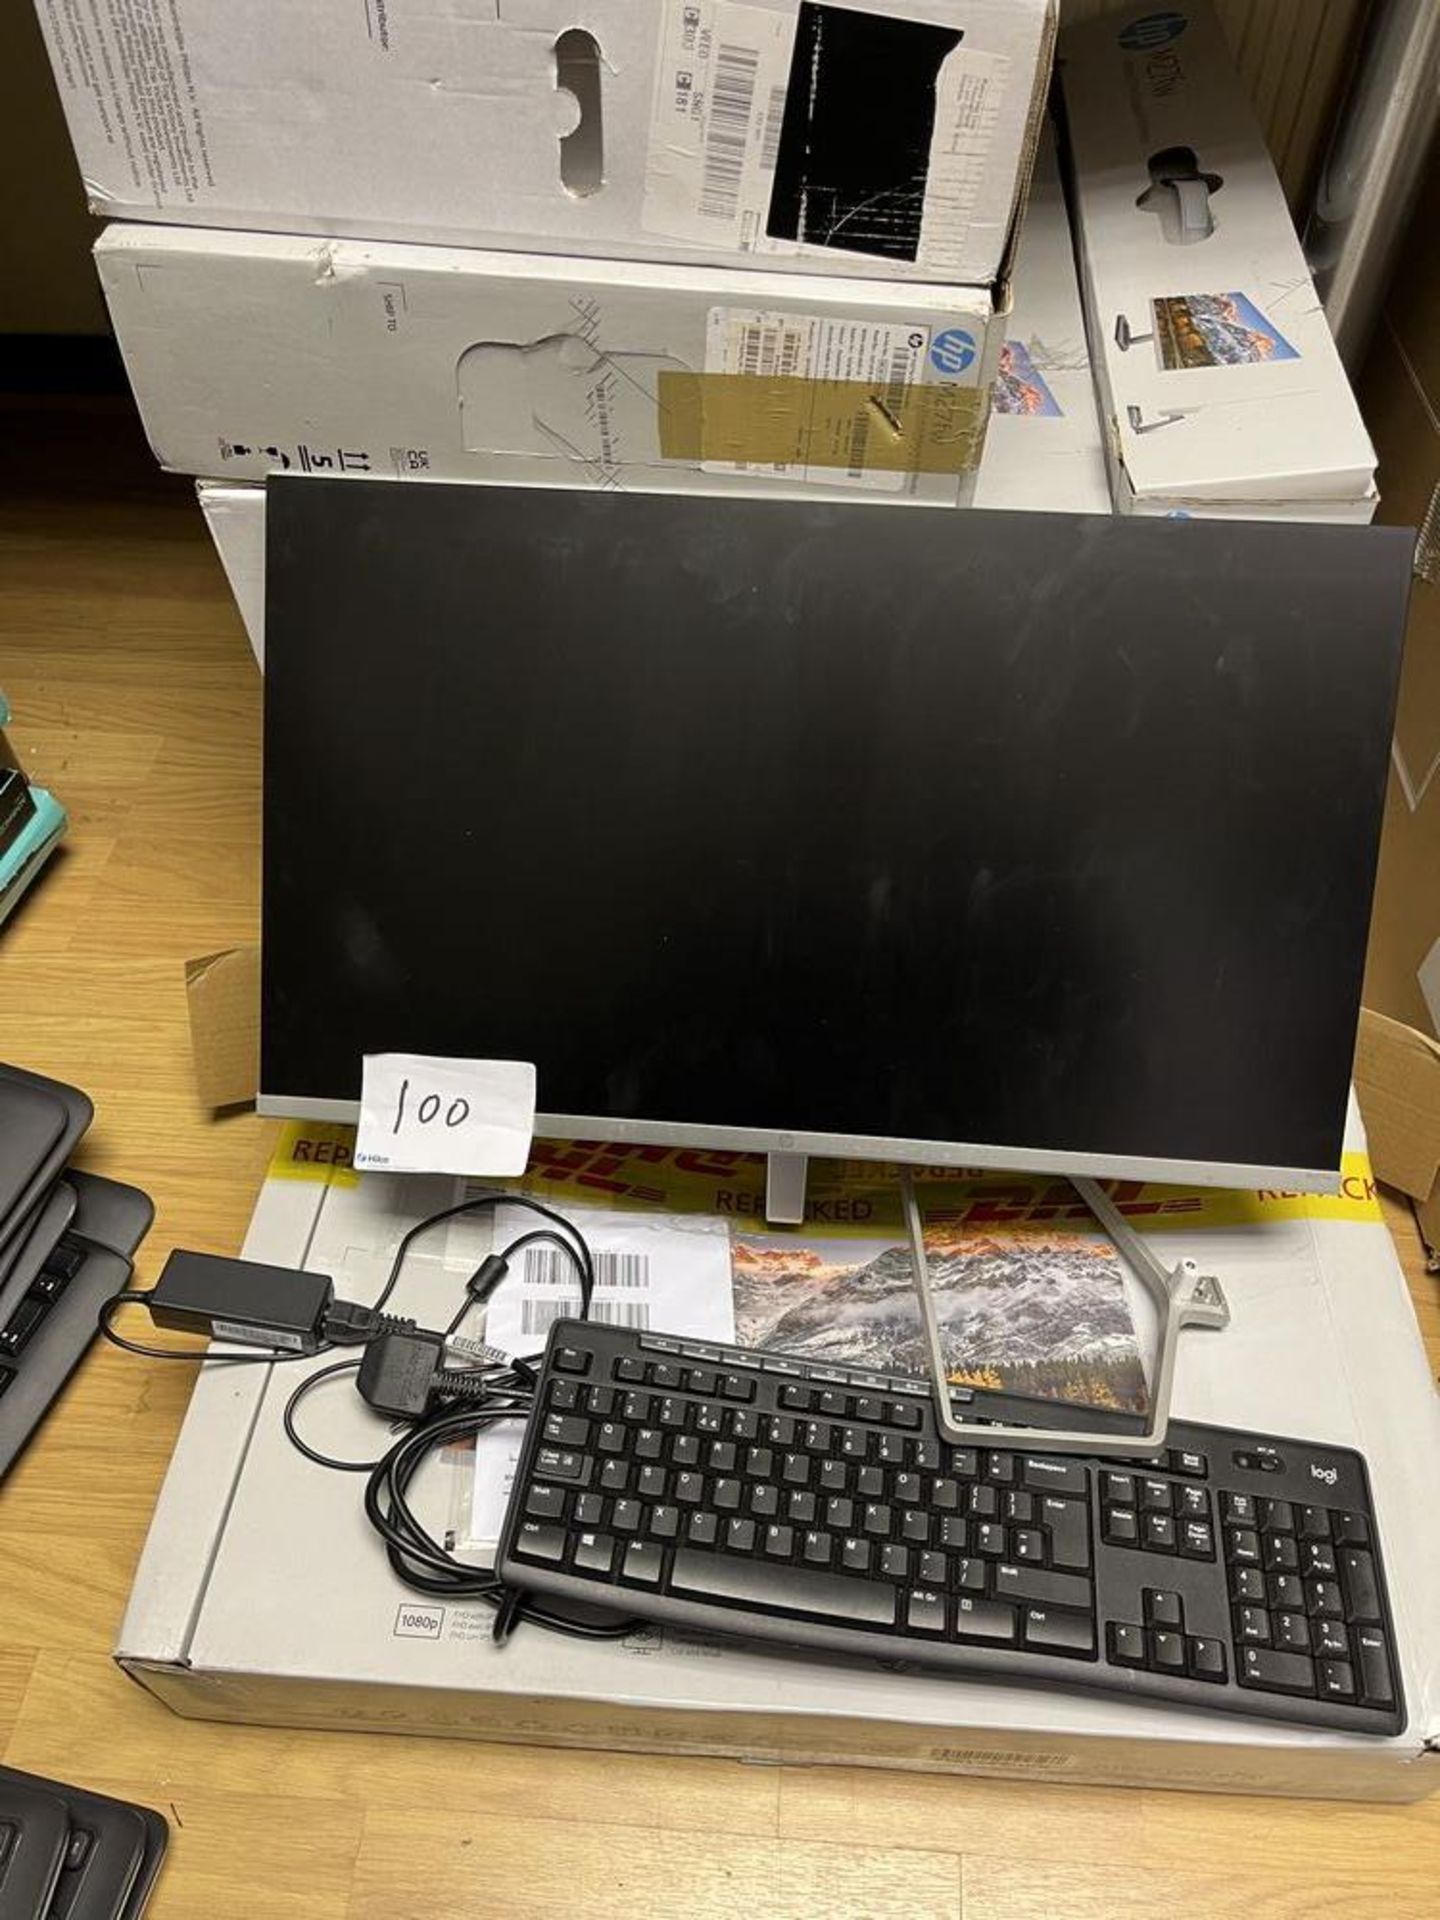 HPM27FW FHD Monitor 68.6cm 27-inch diagonal With stand, keyboard and plugs, comes in box Serial Nu